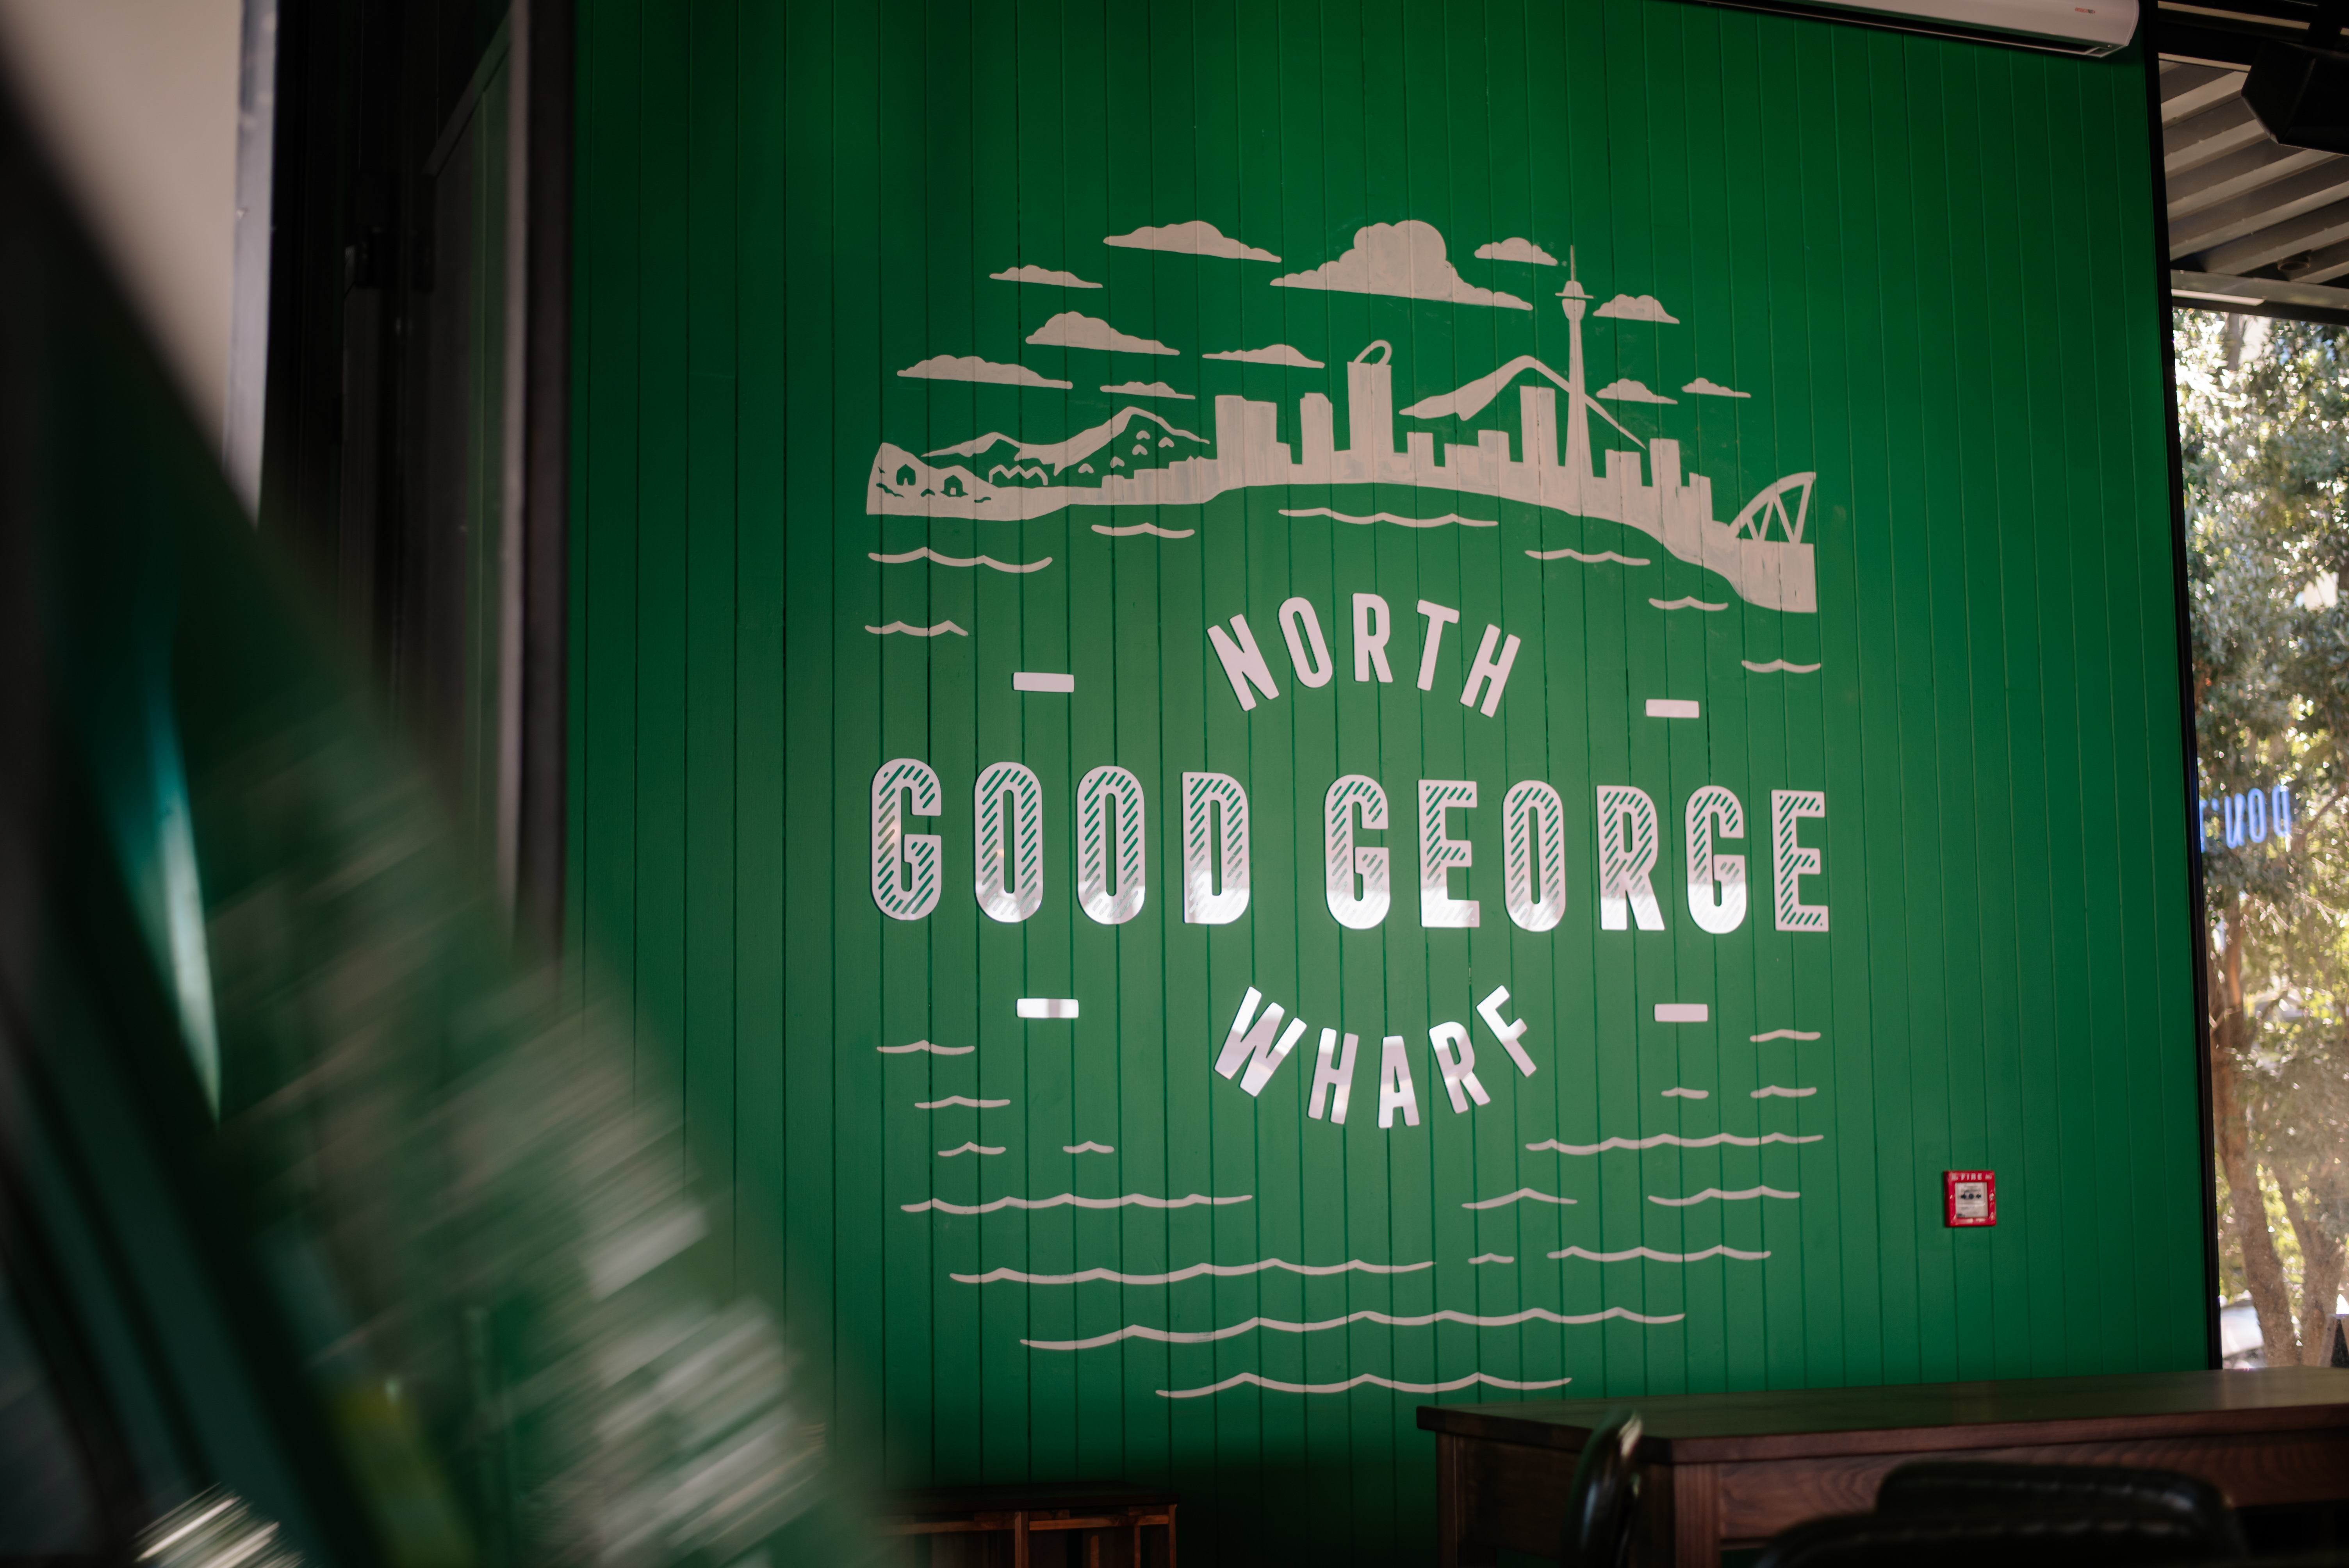 People and Place: Good George, North Wharf hero image